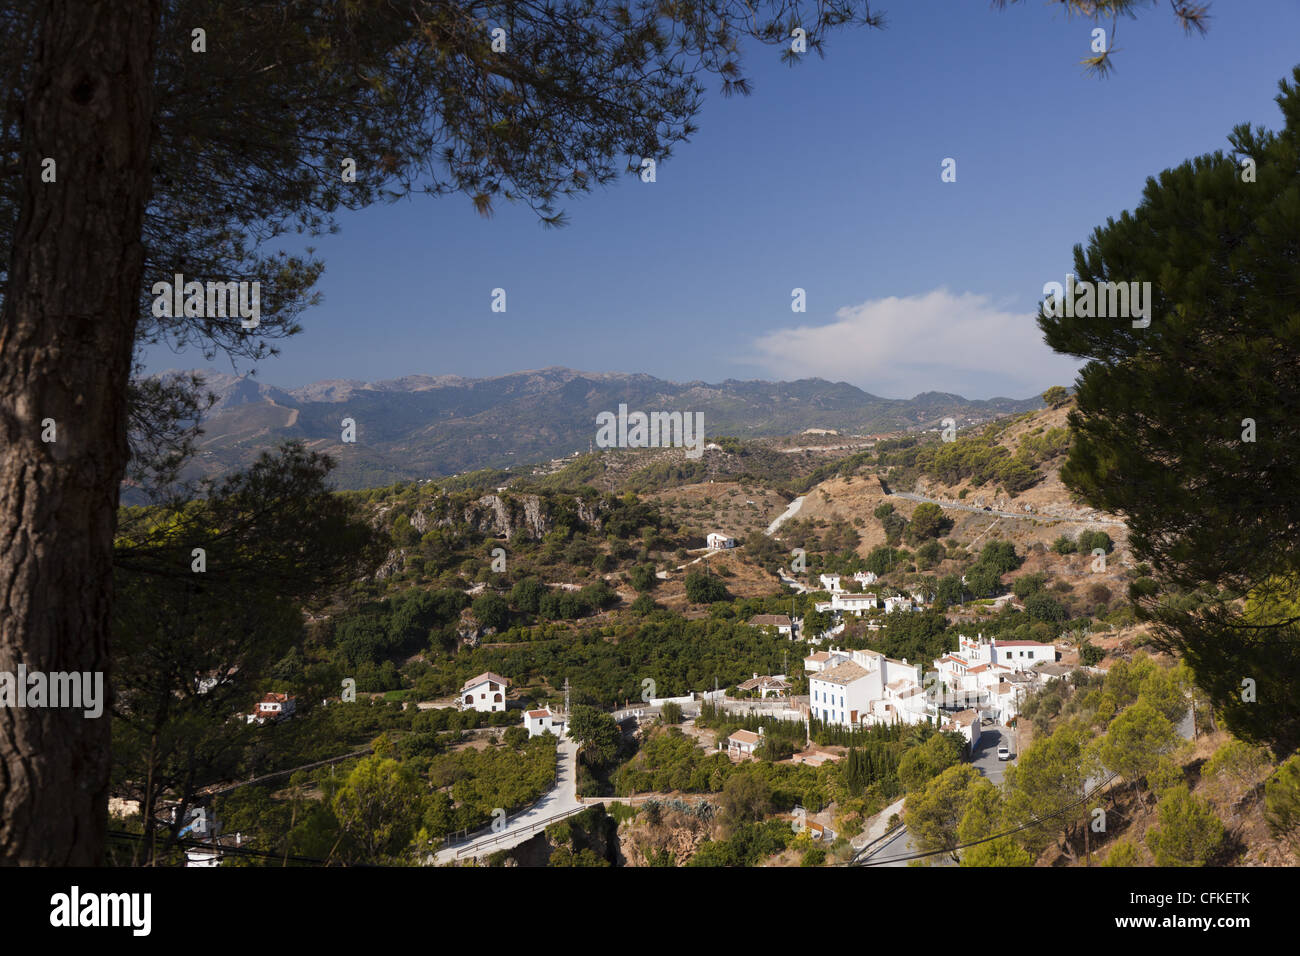 View to the small town of Jorox from highway A-366 between Alozaina and Yunquera, Andalusia Southern Spain Stock Photo